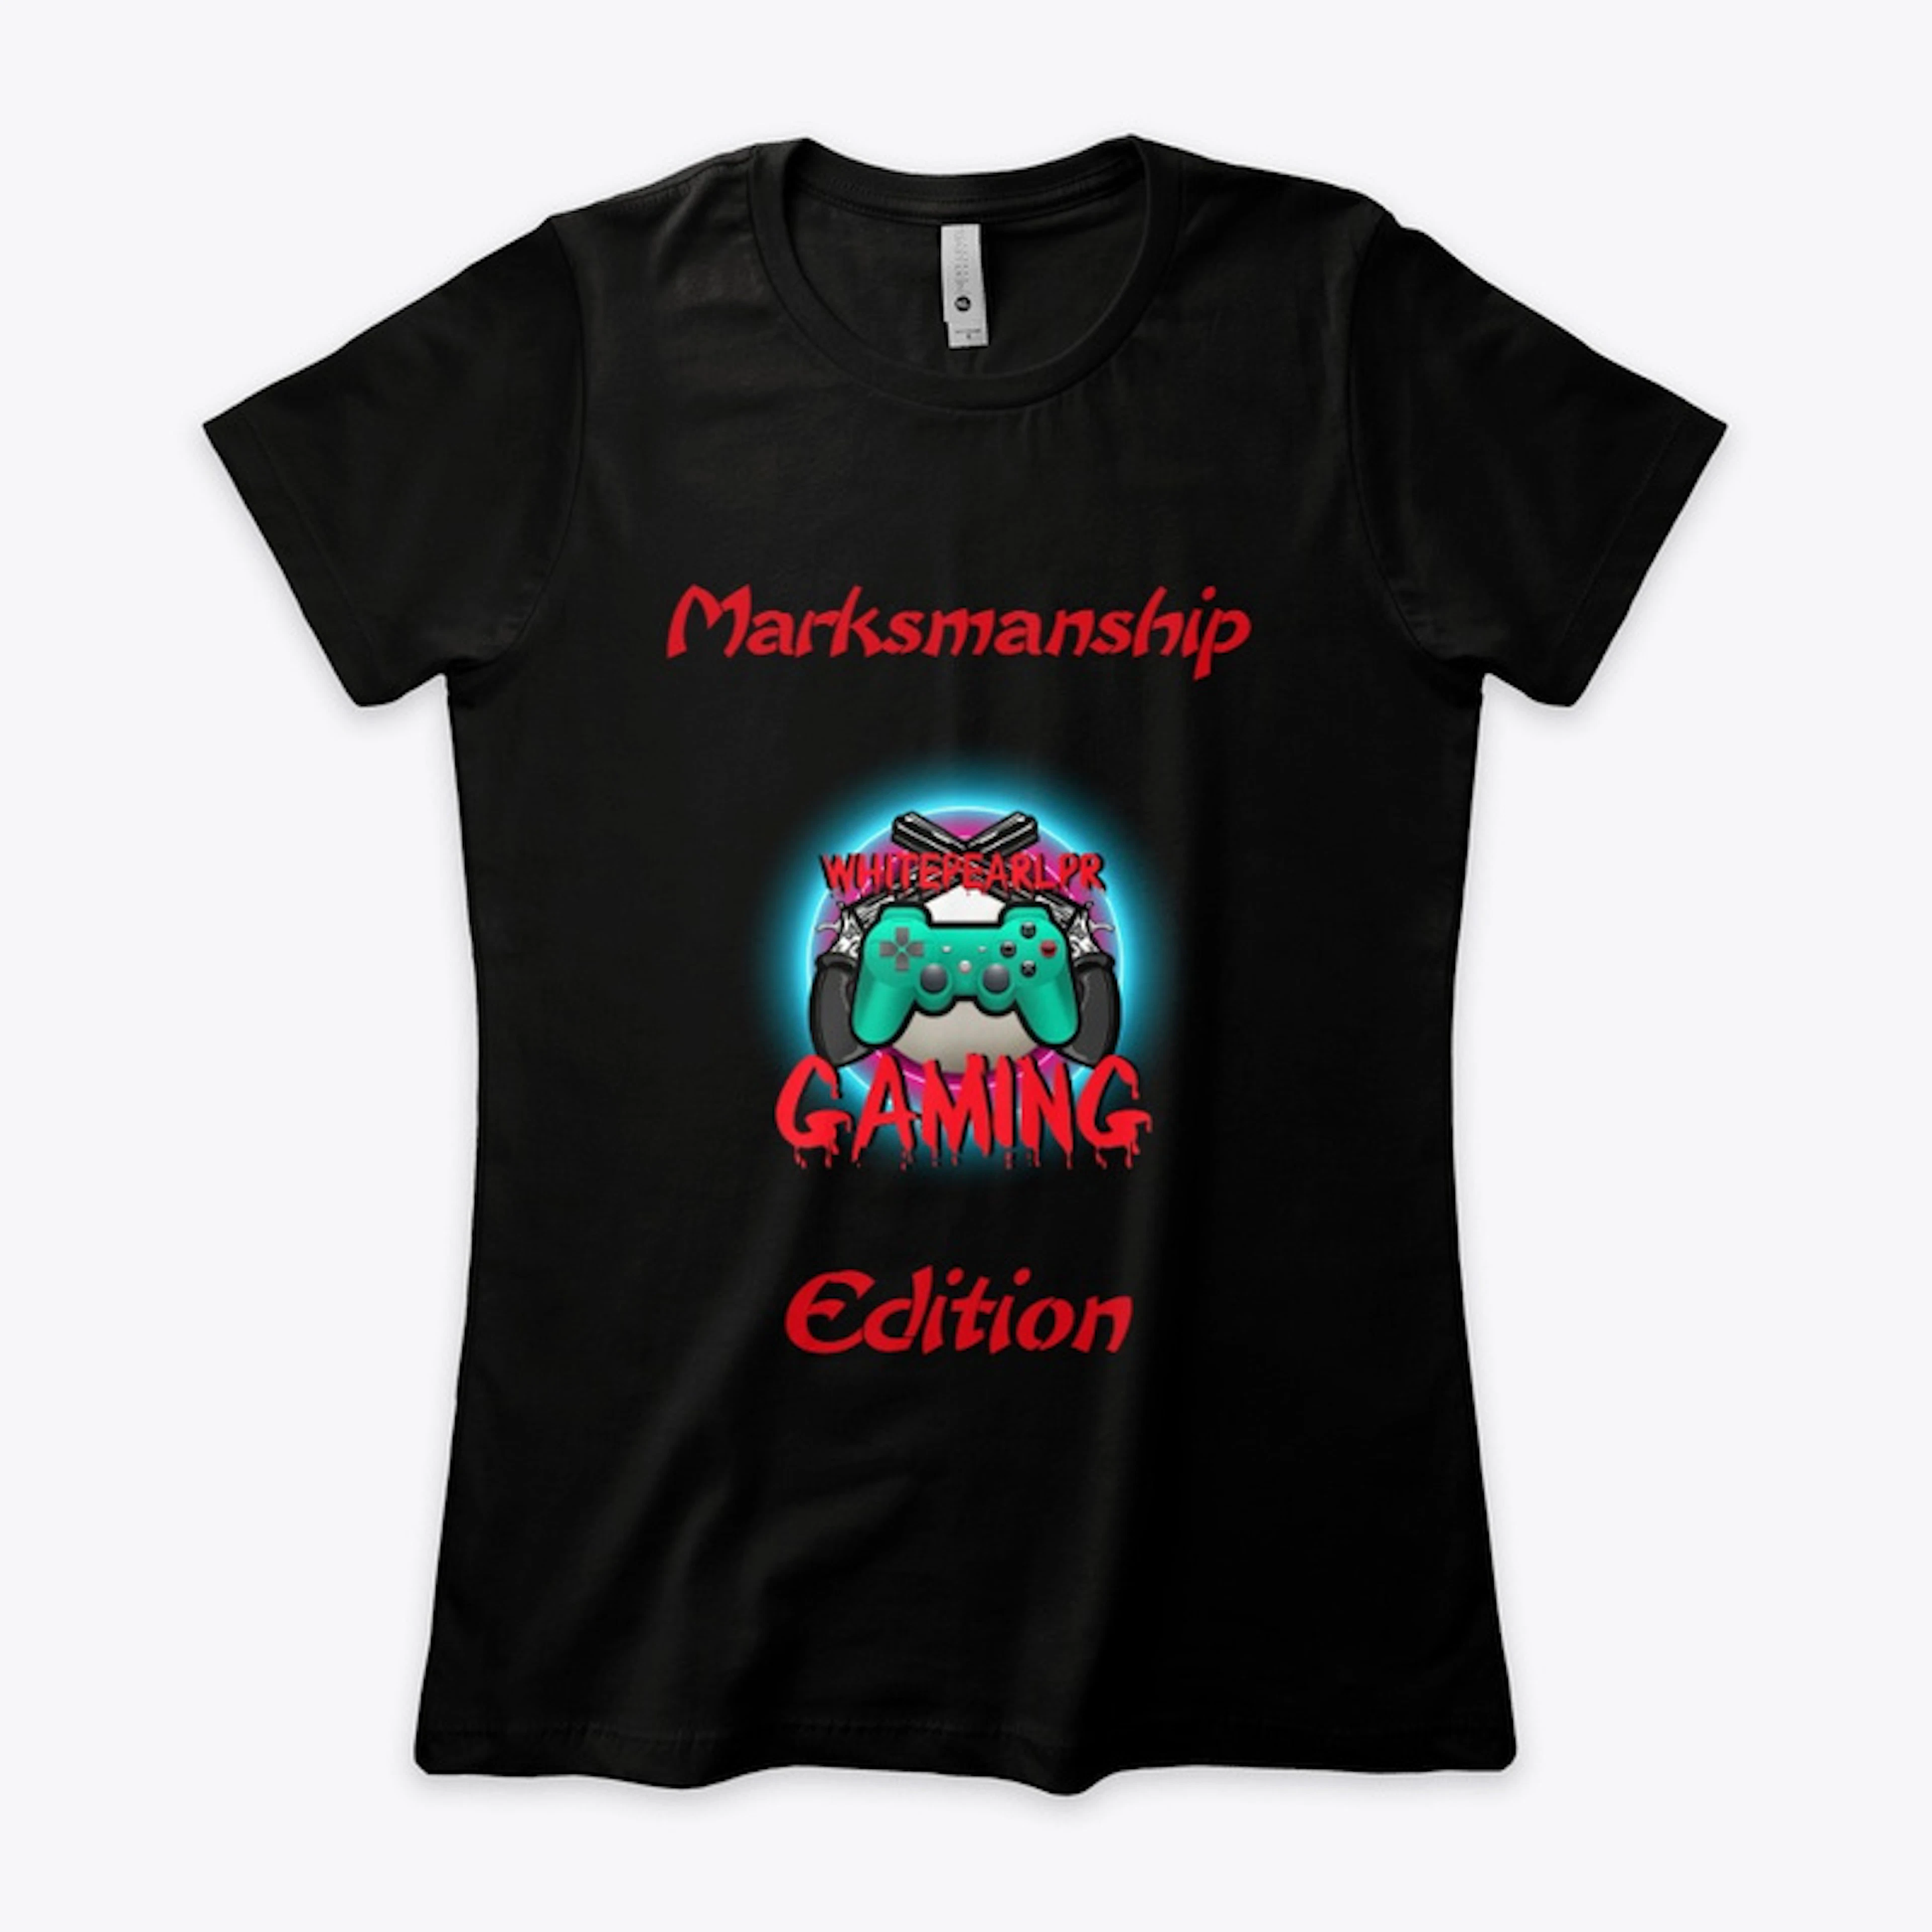 The Marksmanship Collection